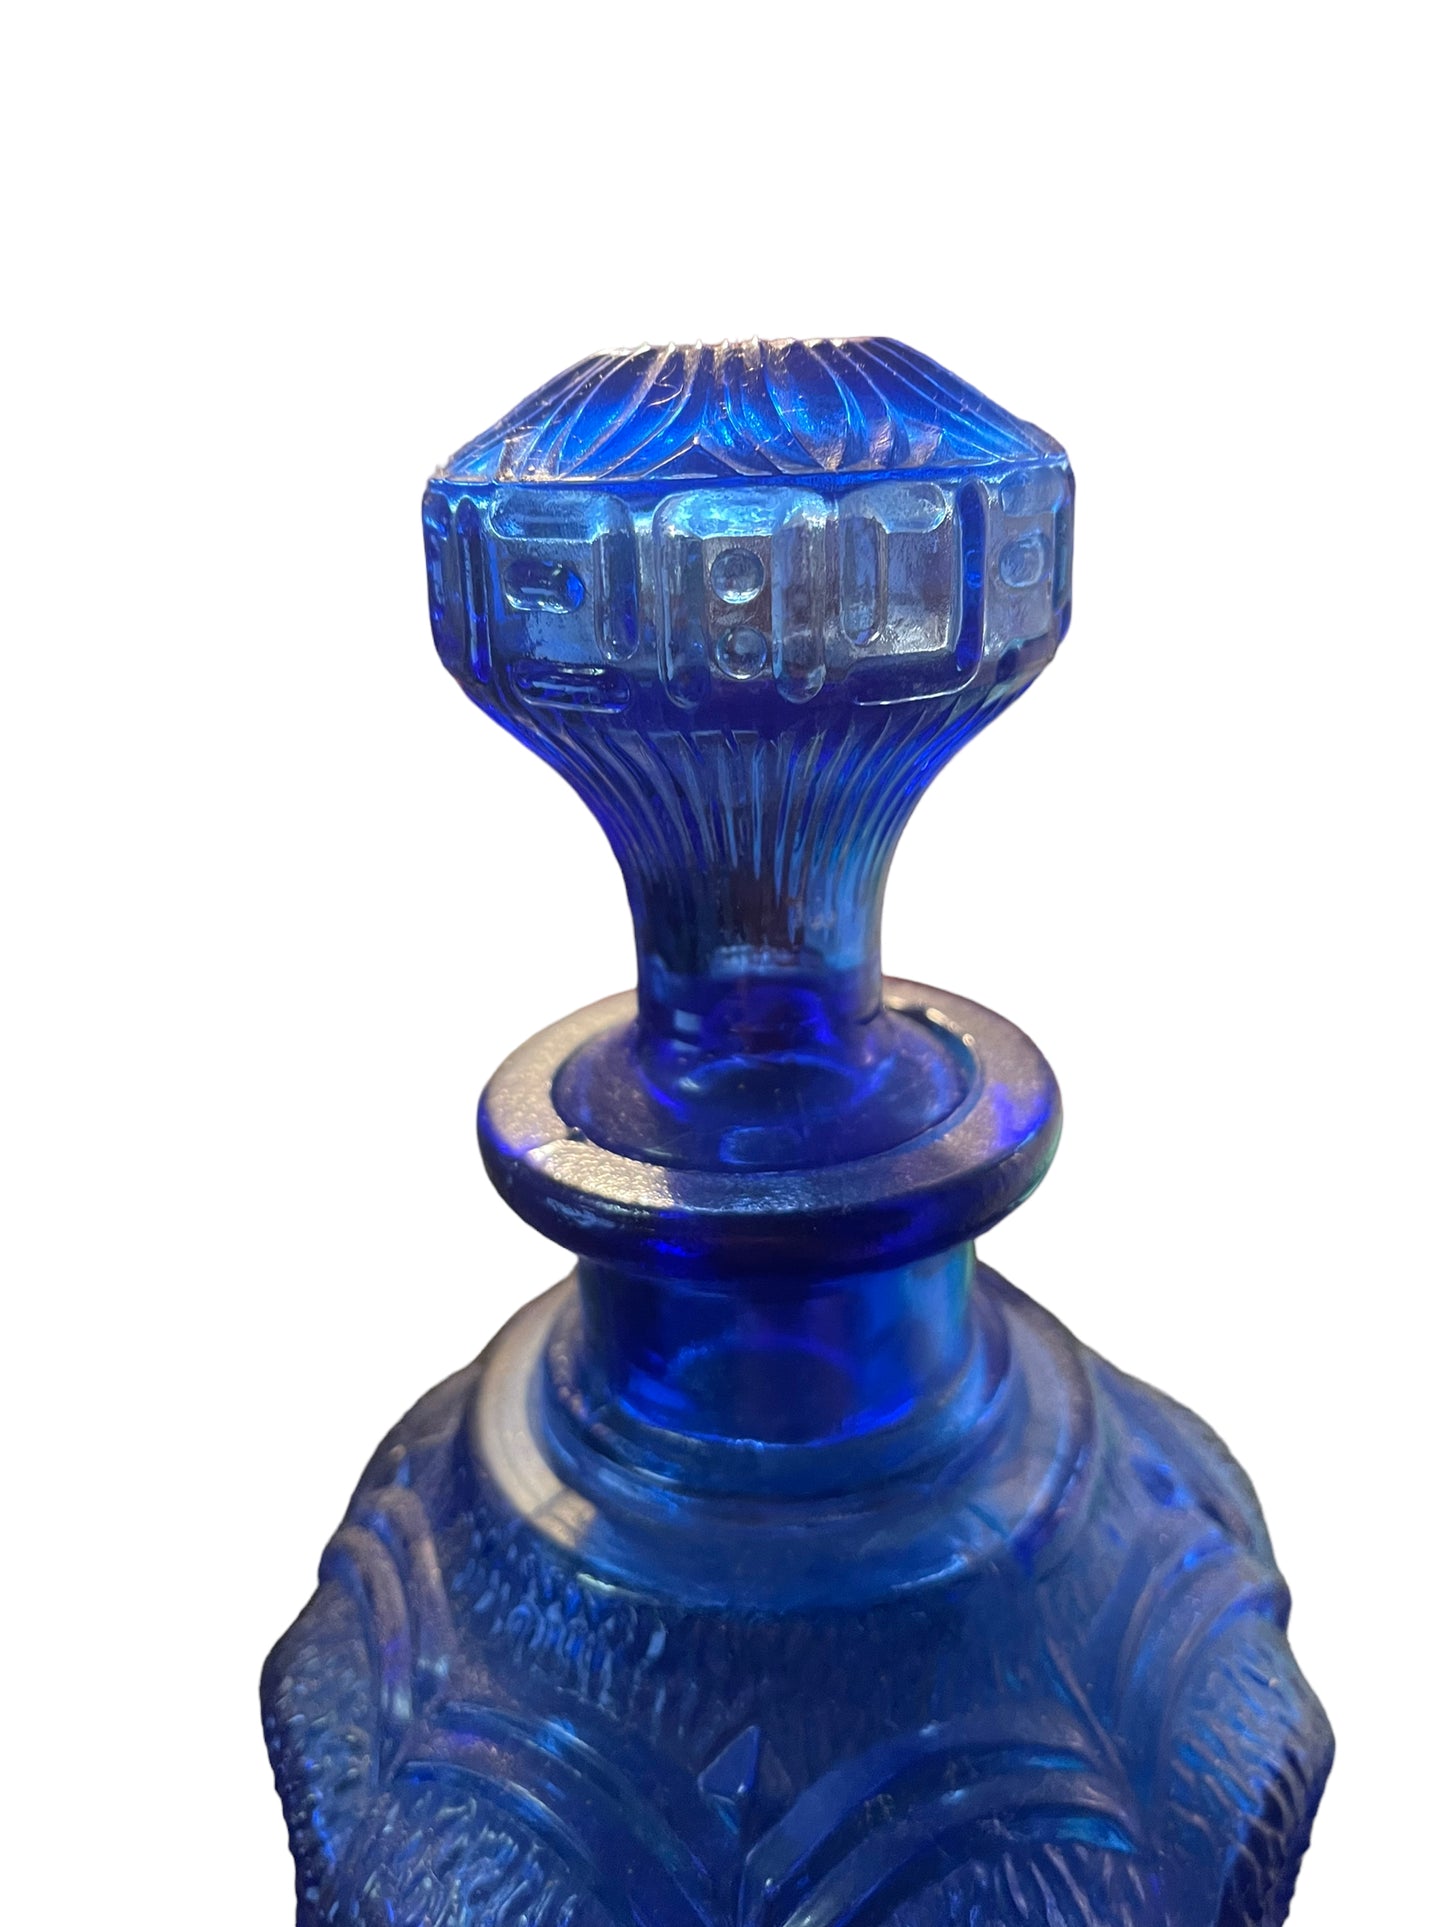 Vintage Cobalt Glass Decanter #2 in Very Rich Beautiful Blue